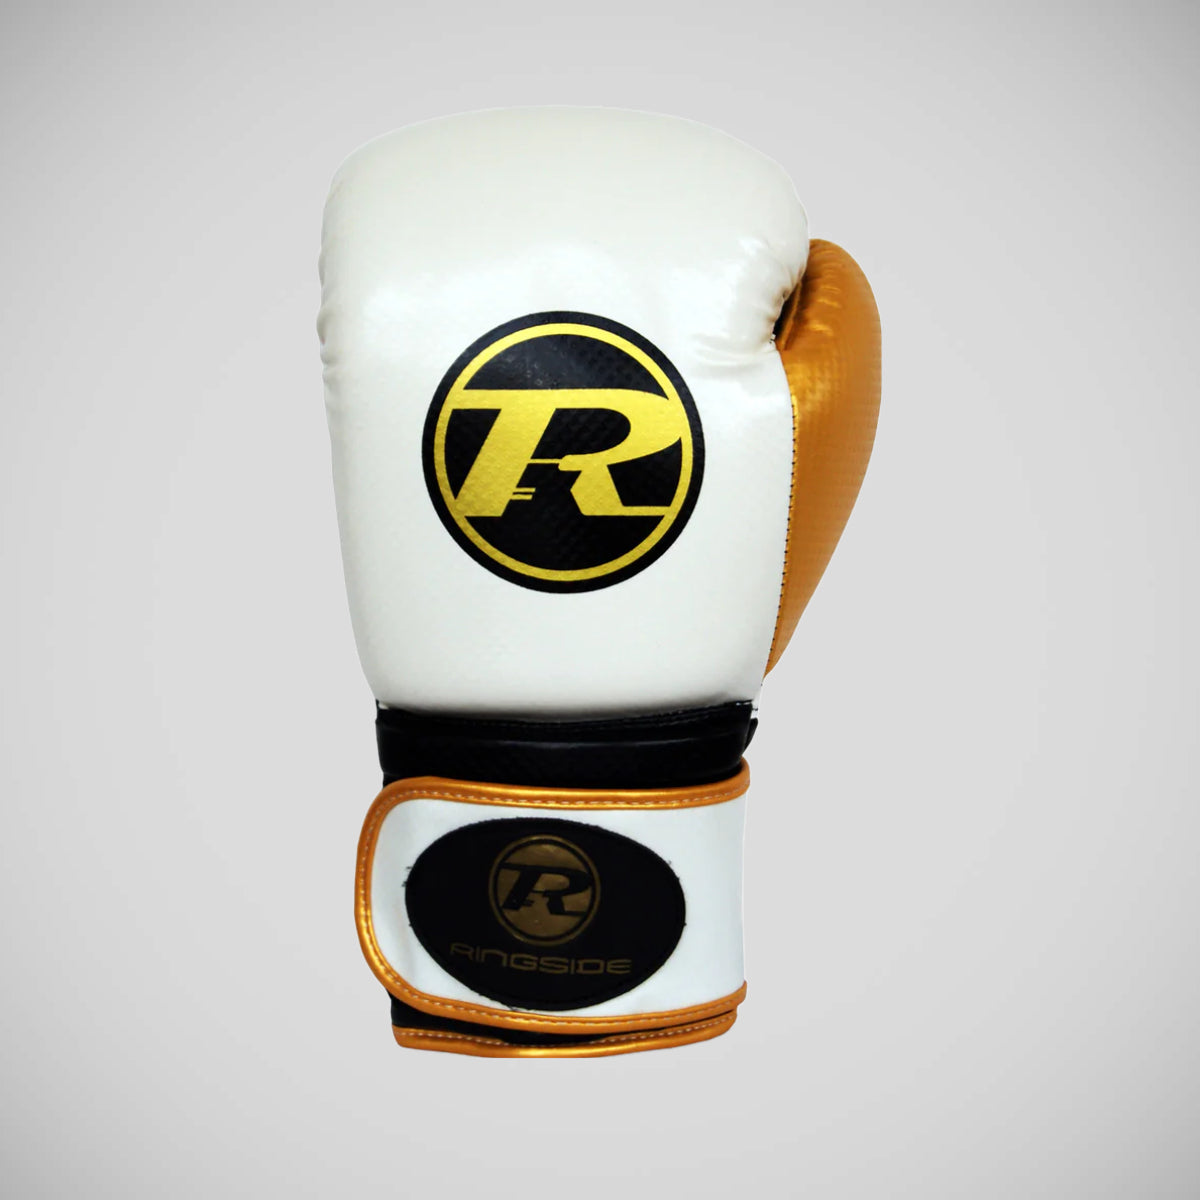 White/Gold Ringside Pro Fitness Boxing Gloves from Made4Fighters